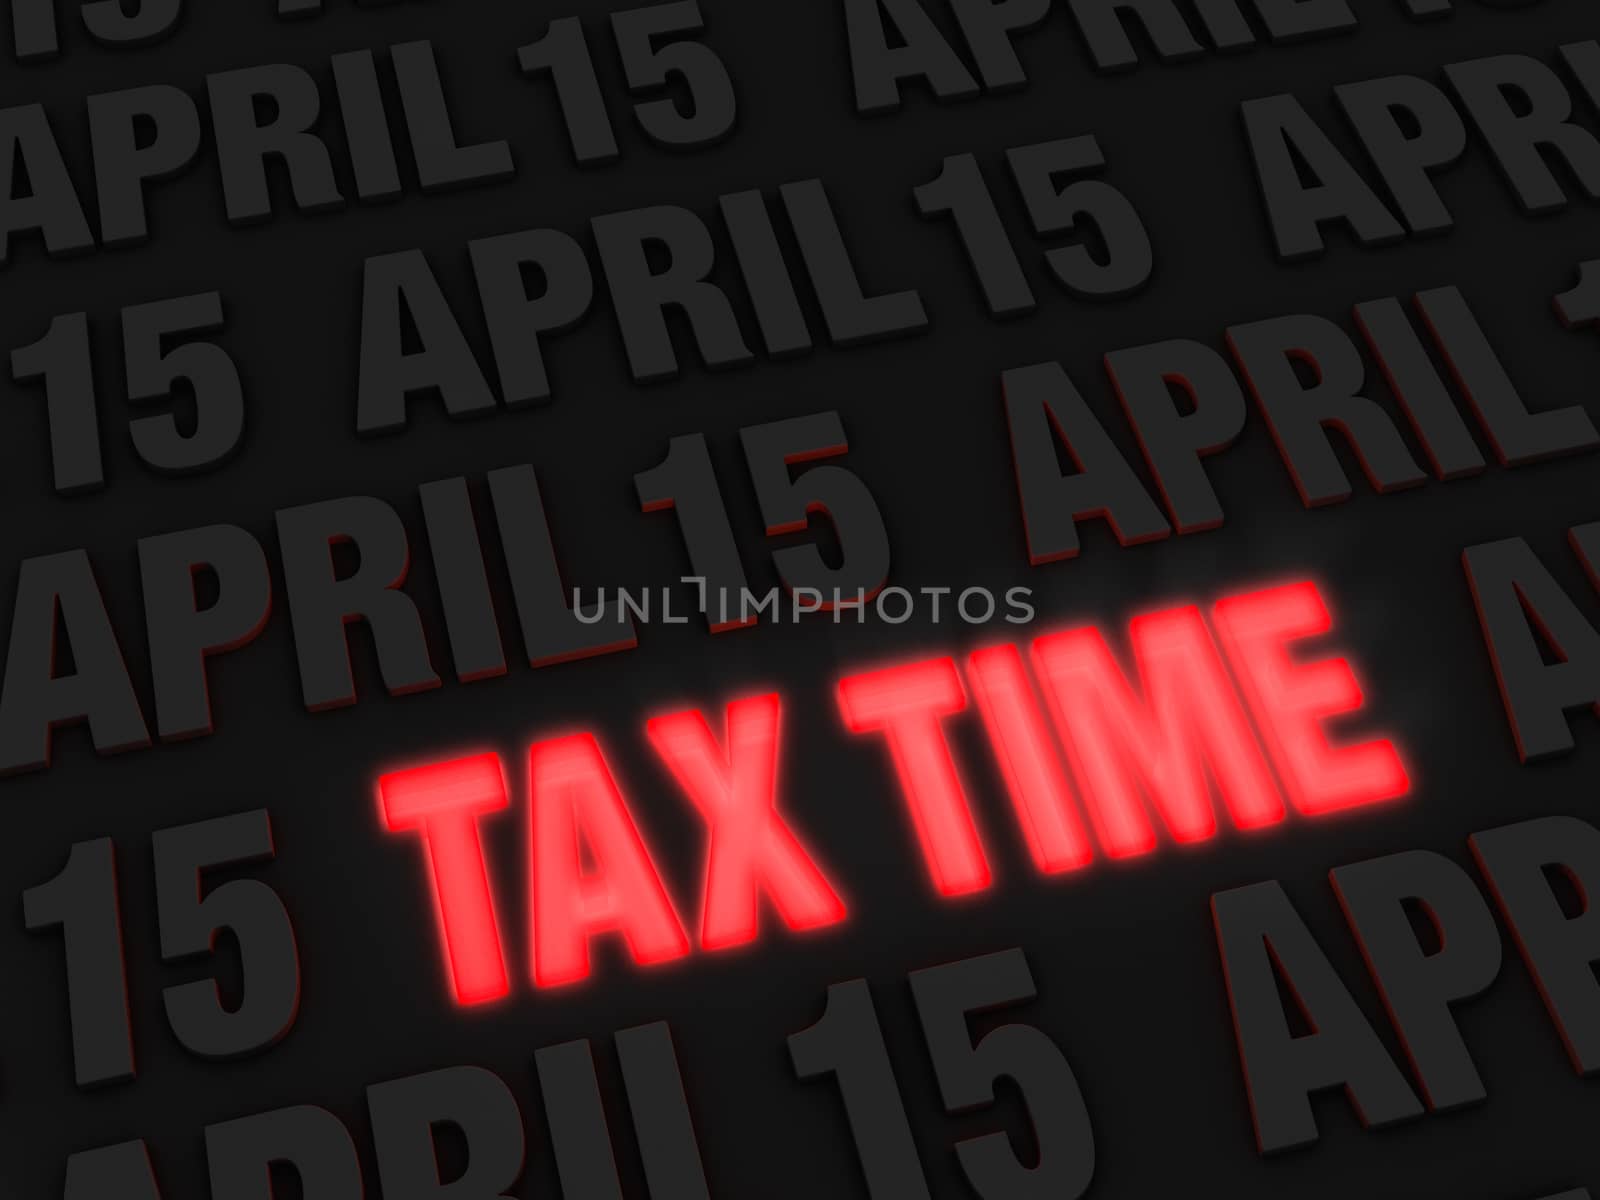 Bold, glowing red "TAX TIME" on a dark background of "APRIL 15"s warns of approaching Tax Day